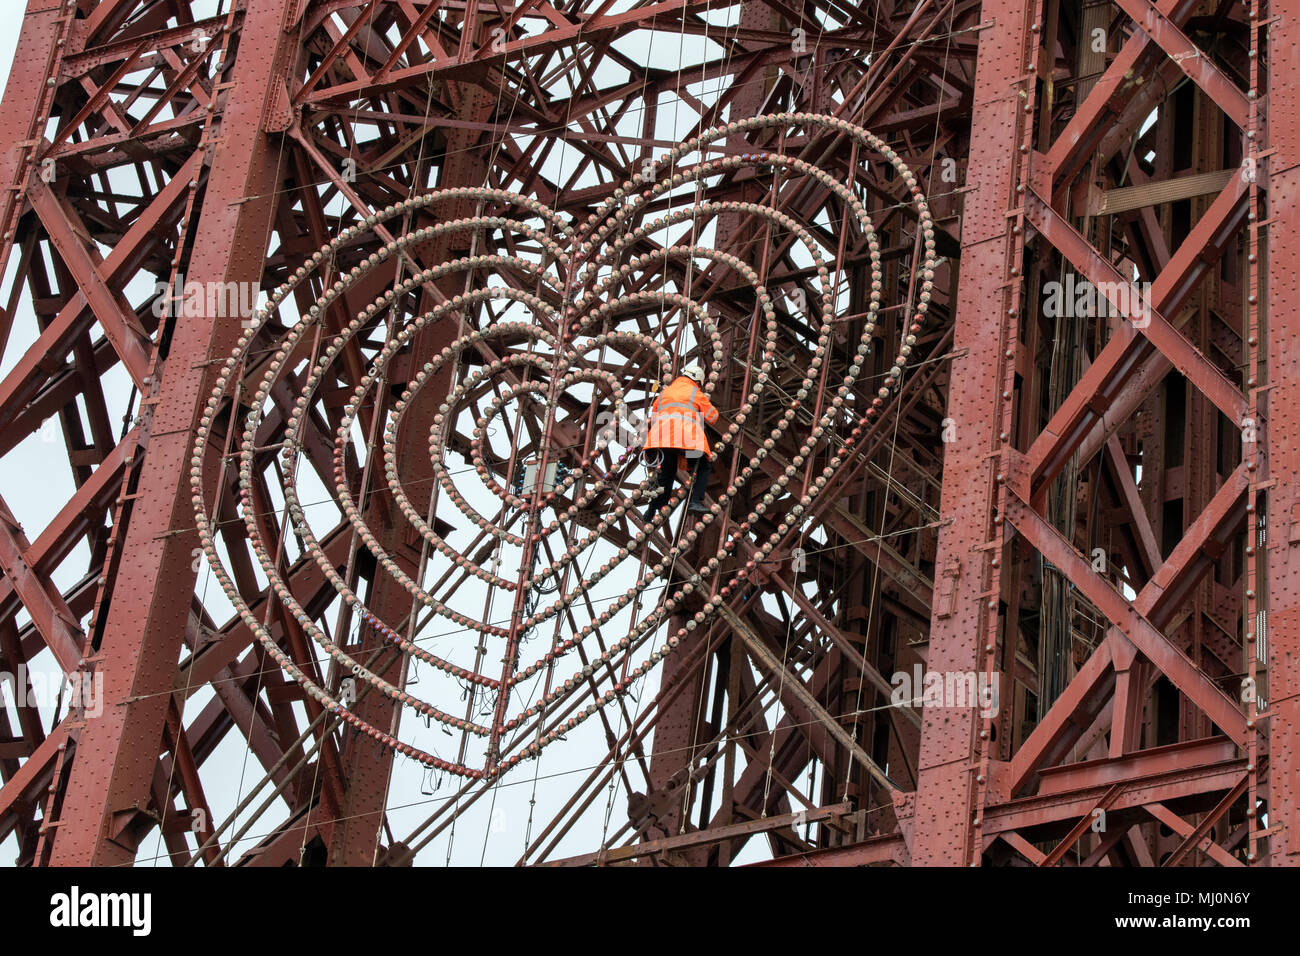 A maintenance workman repairing the lights on the fascia of Blackpool tower on the seafront promenade at Balckpool in Lancashire, UK. Stock Photo